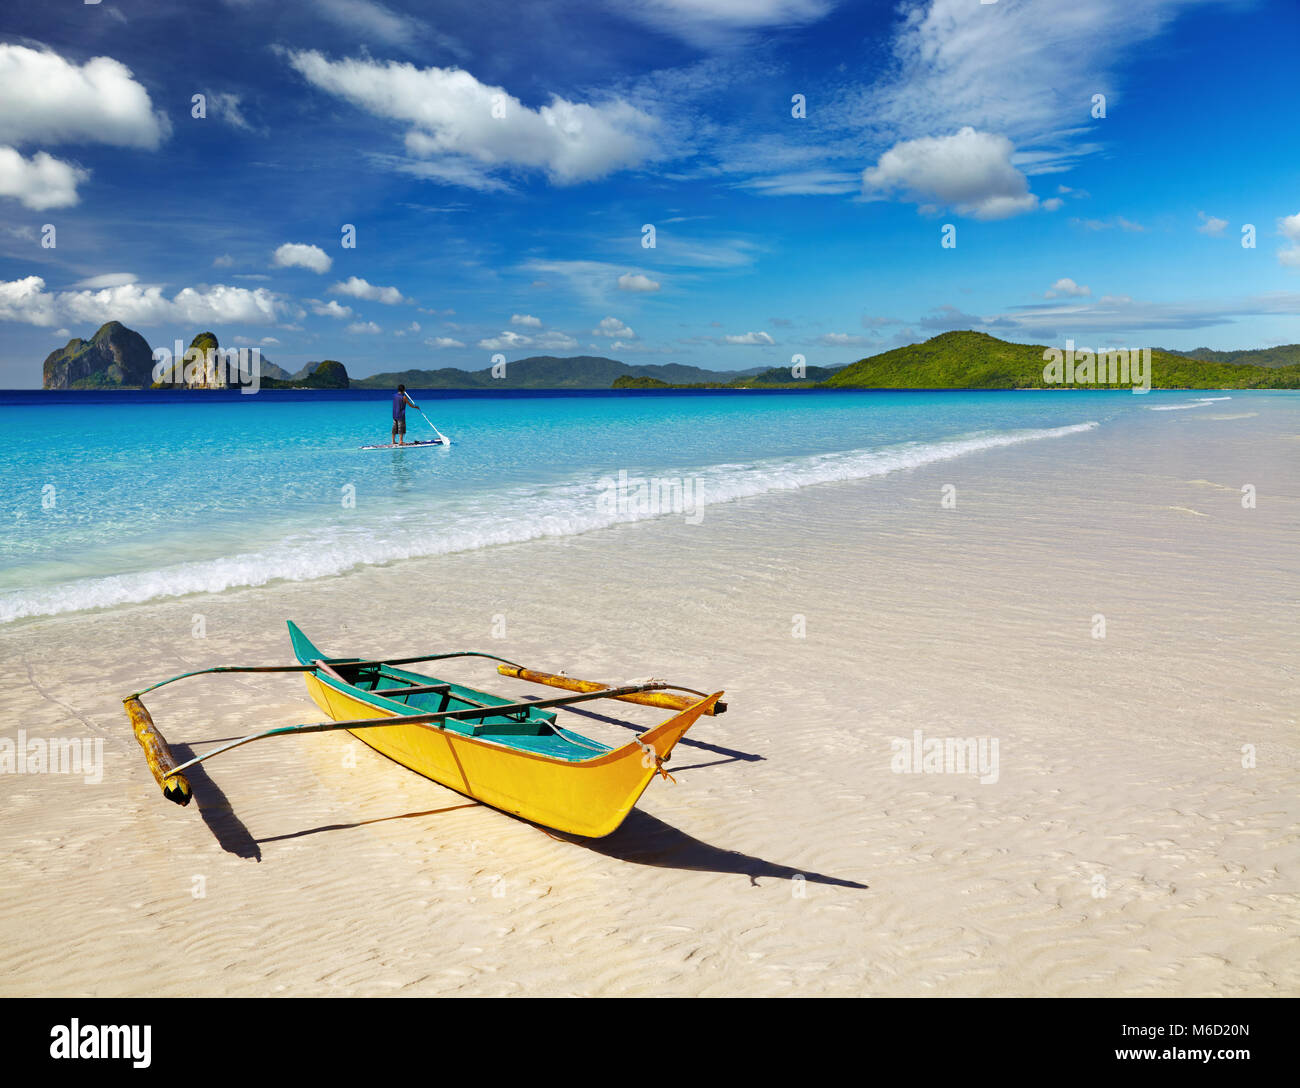 Landscape with beautiful tropical beach and blue sky Stock Photo